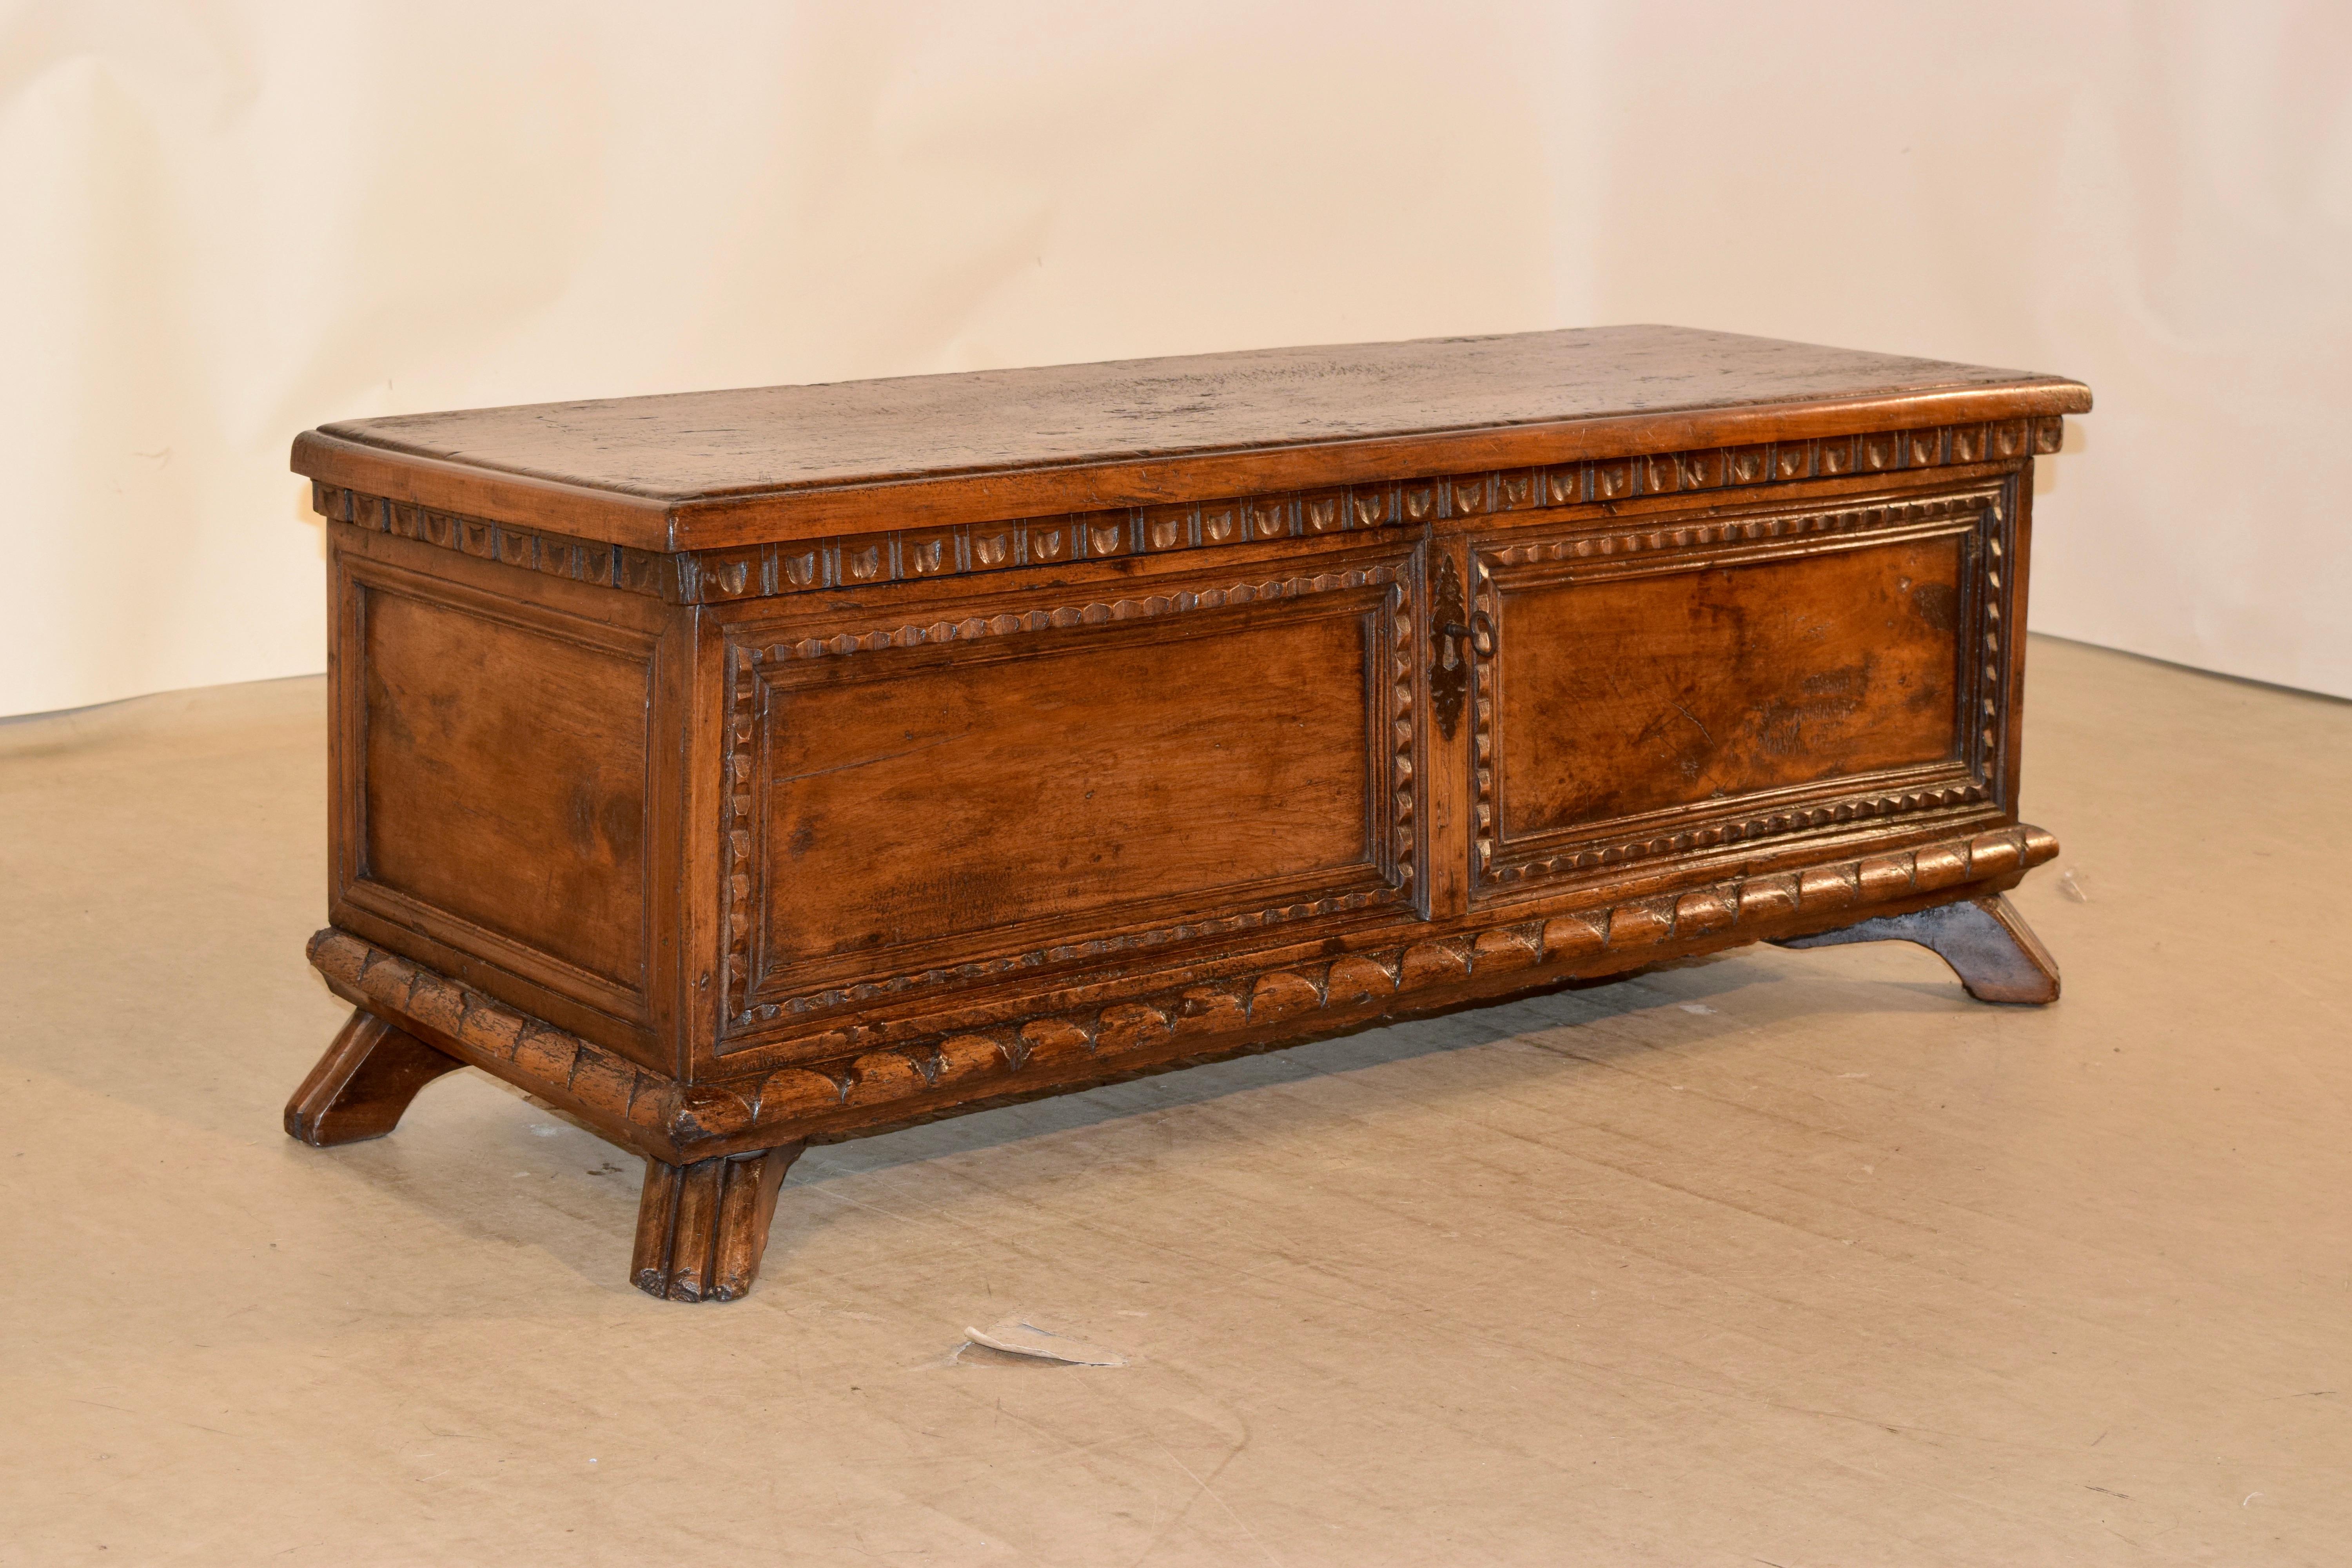 18th century Italian cassone hand carved out of walnut. The top is plain with a beveled edge and the sides are also plain with molded panels. The front panel has linear molding which form two rectangular panels. The case rests upon four rustic hand